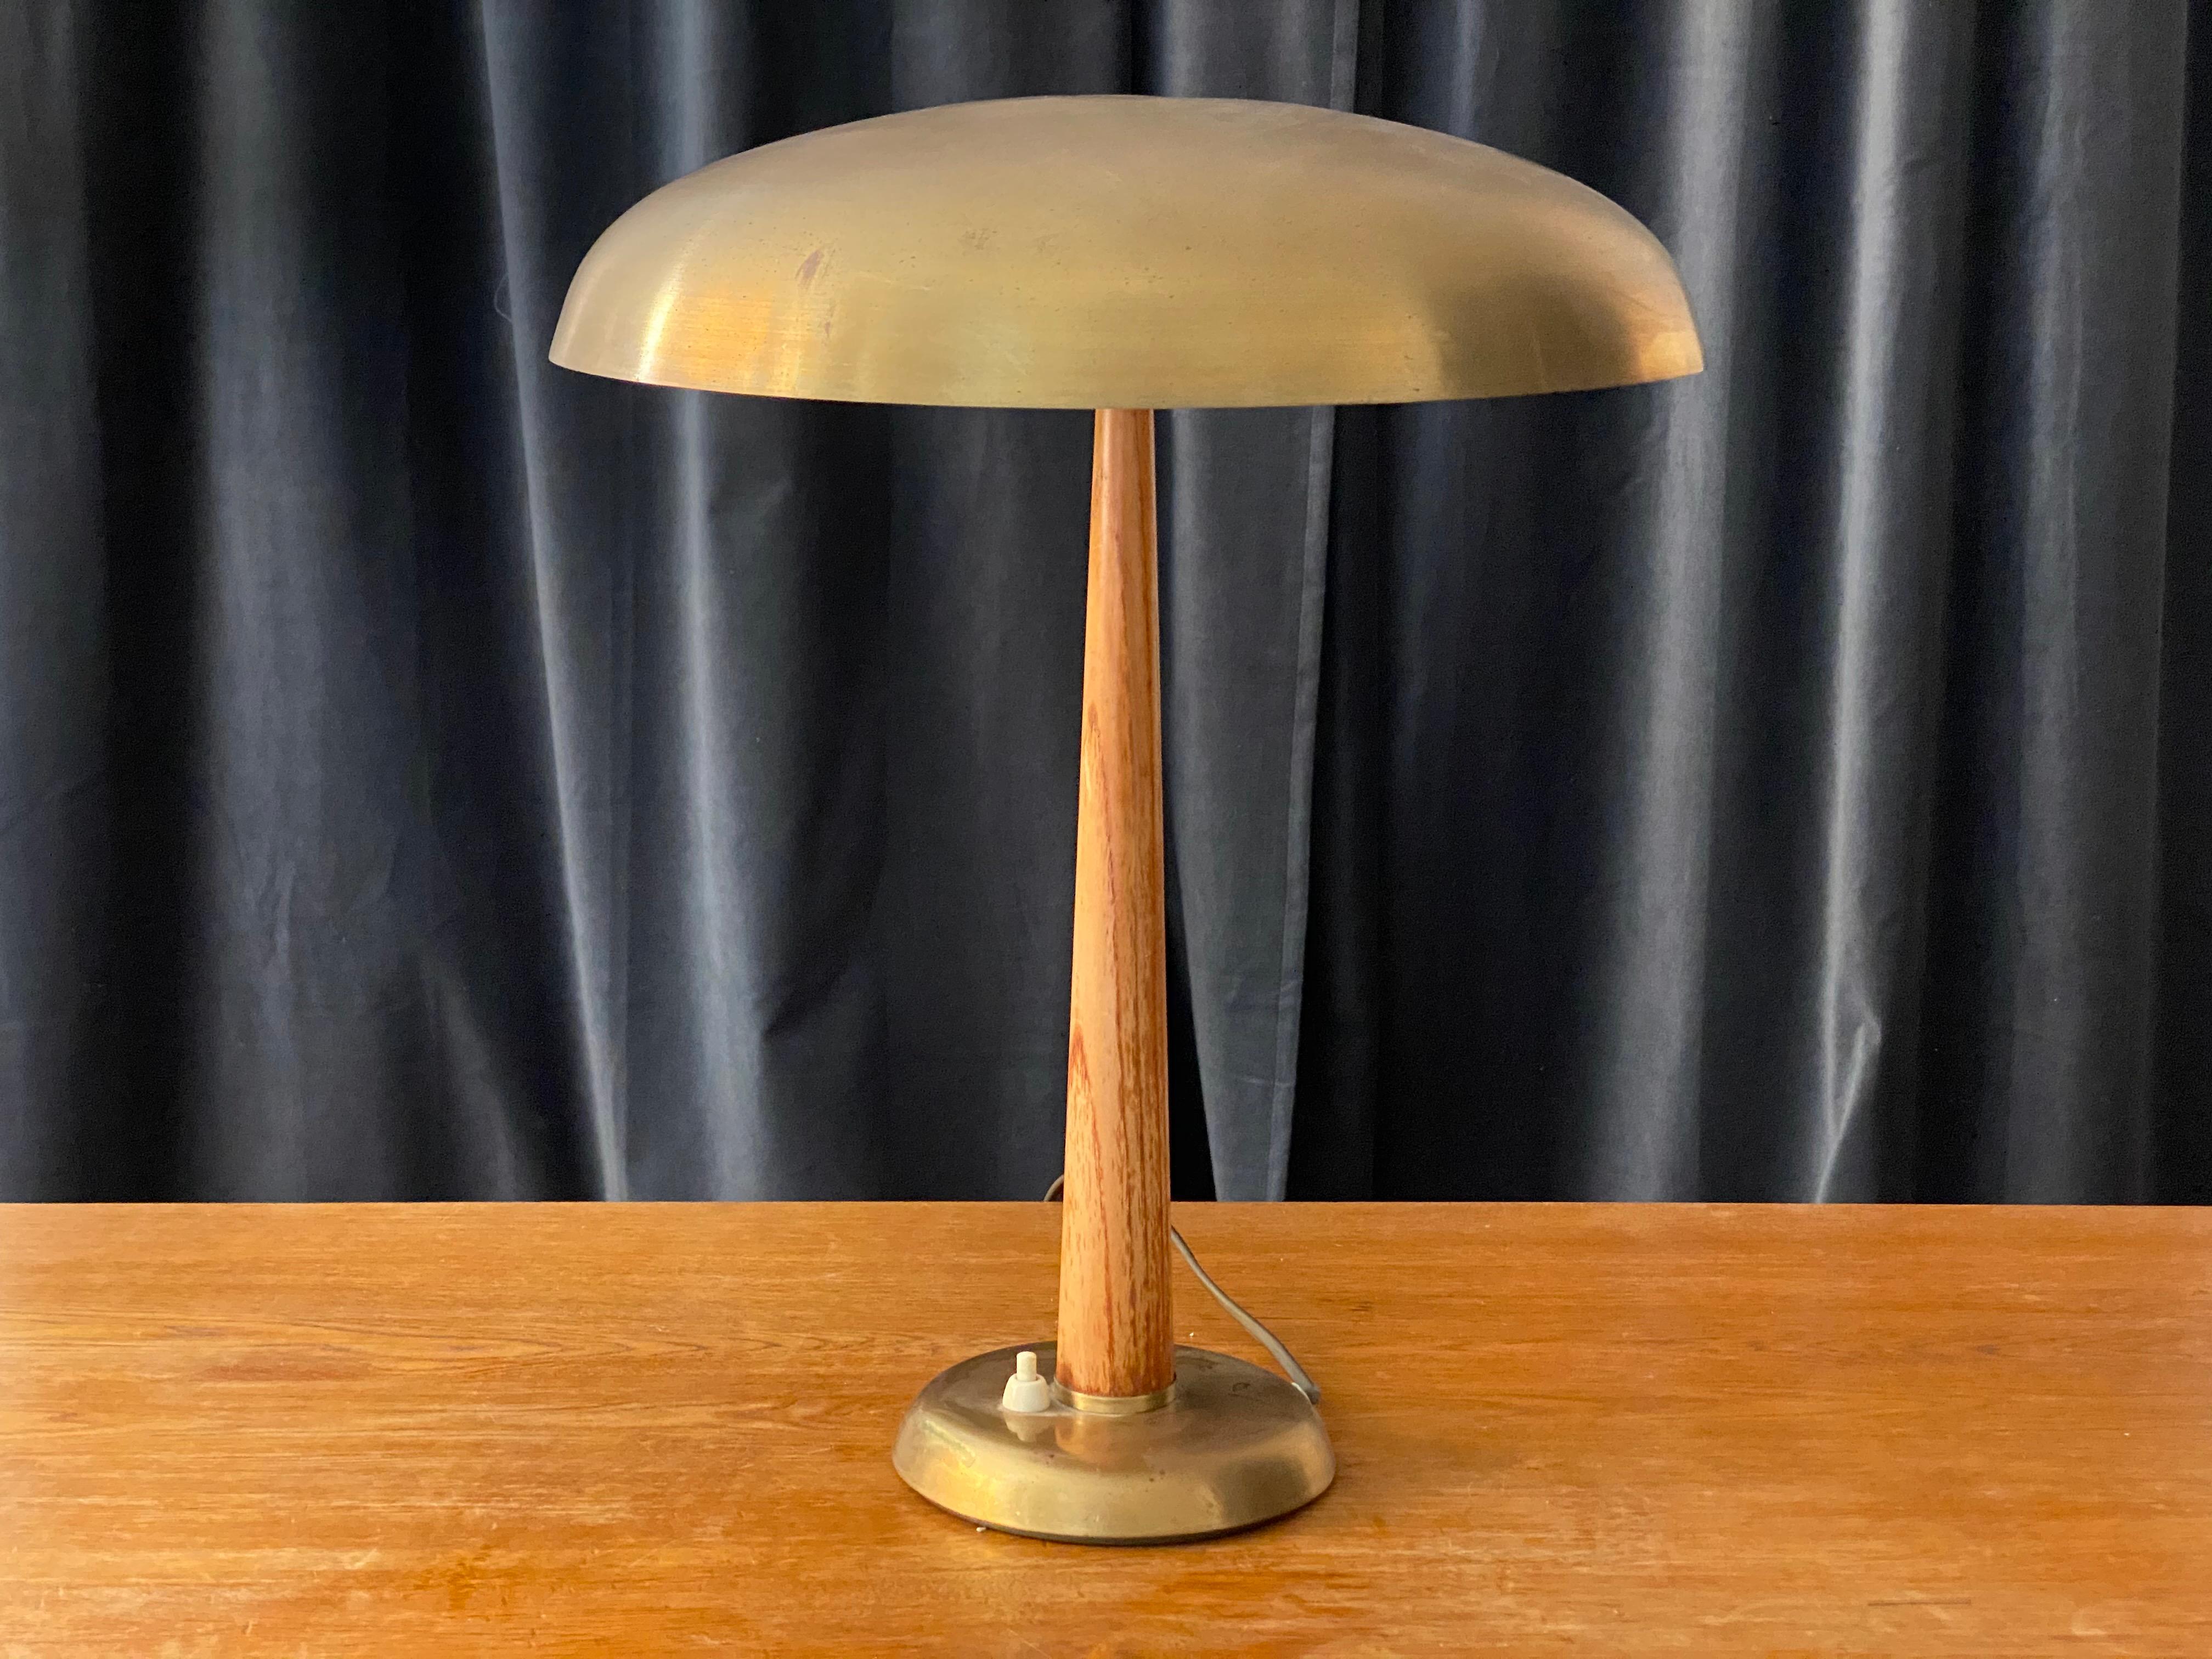 A 1940s functionalist table lamp / desk light. Swedish production label. Design attributed to Hans Bergström. Rod and base with similar proportions and configuration as documented Bergström models designed for Atelje Lyktan.

Executed in brass and